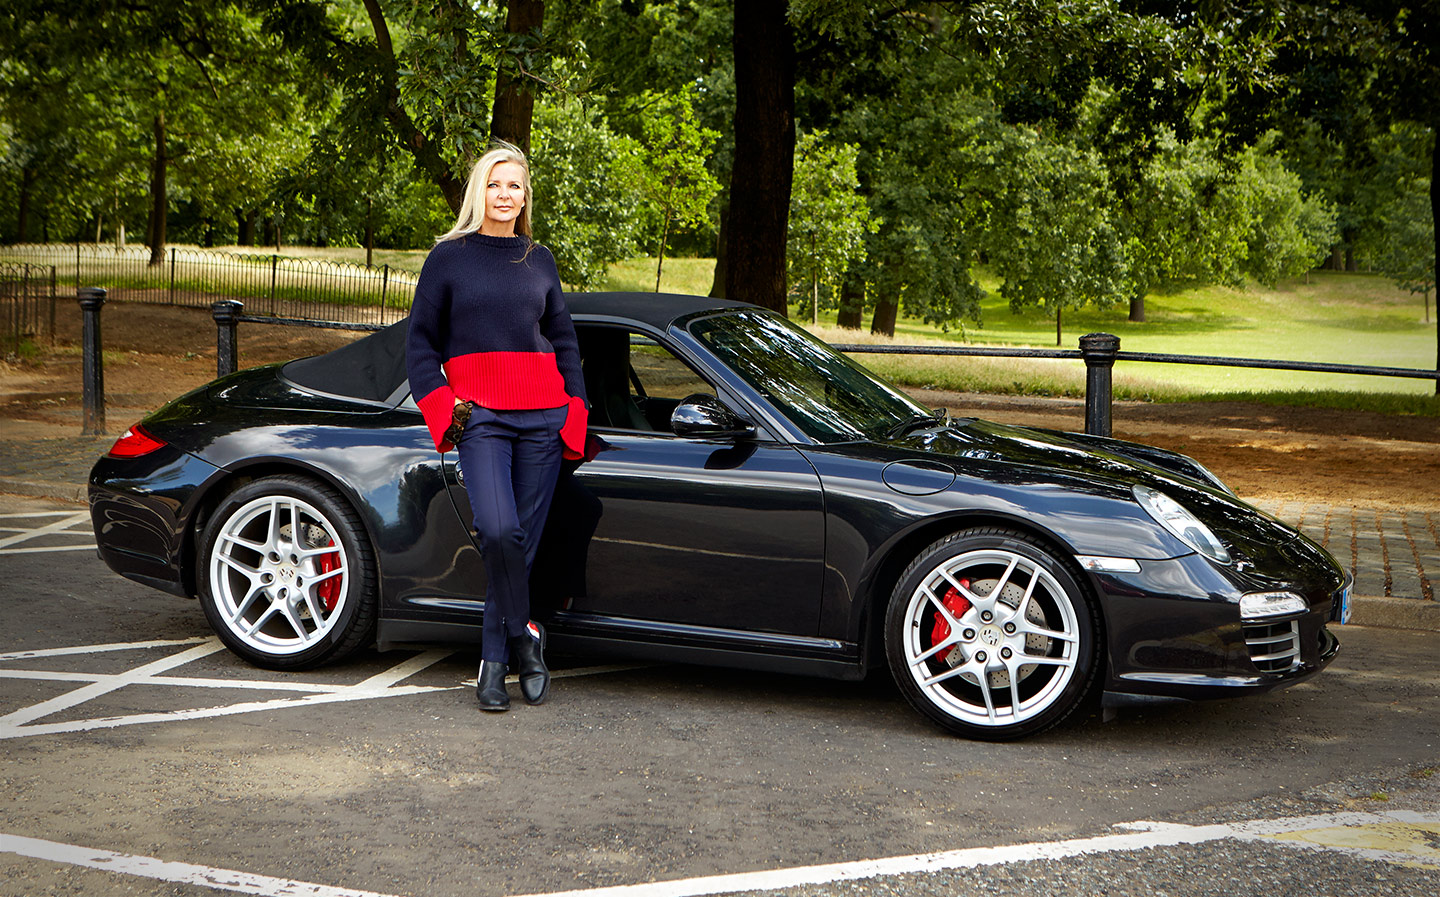 Sunday Times Driving Me and My Motor interview with Amanda Wakeley, fashion designer, on her cars and career